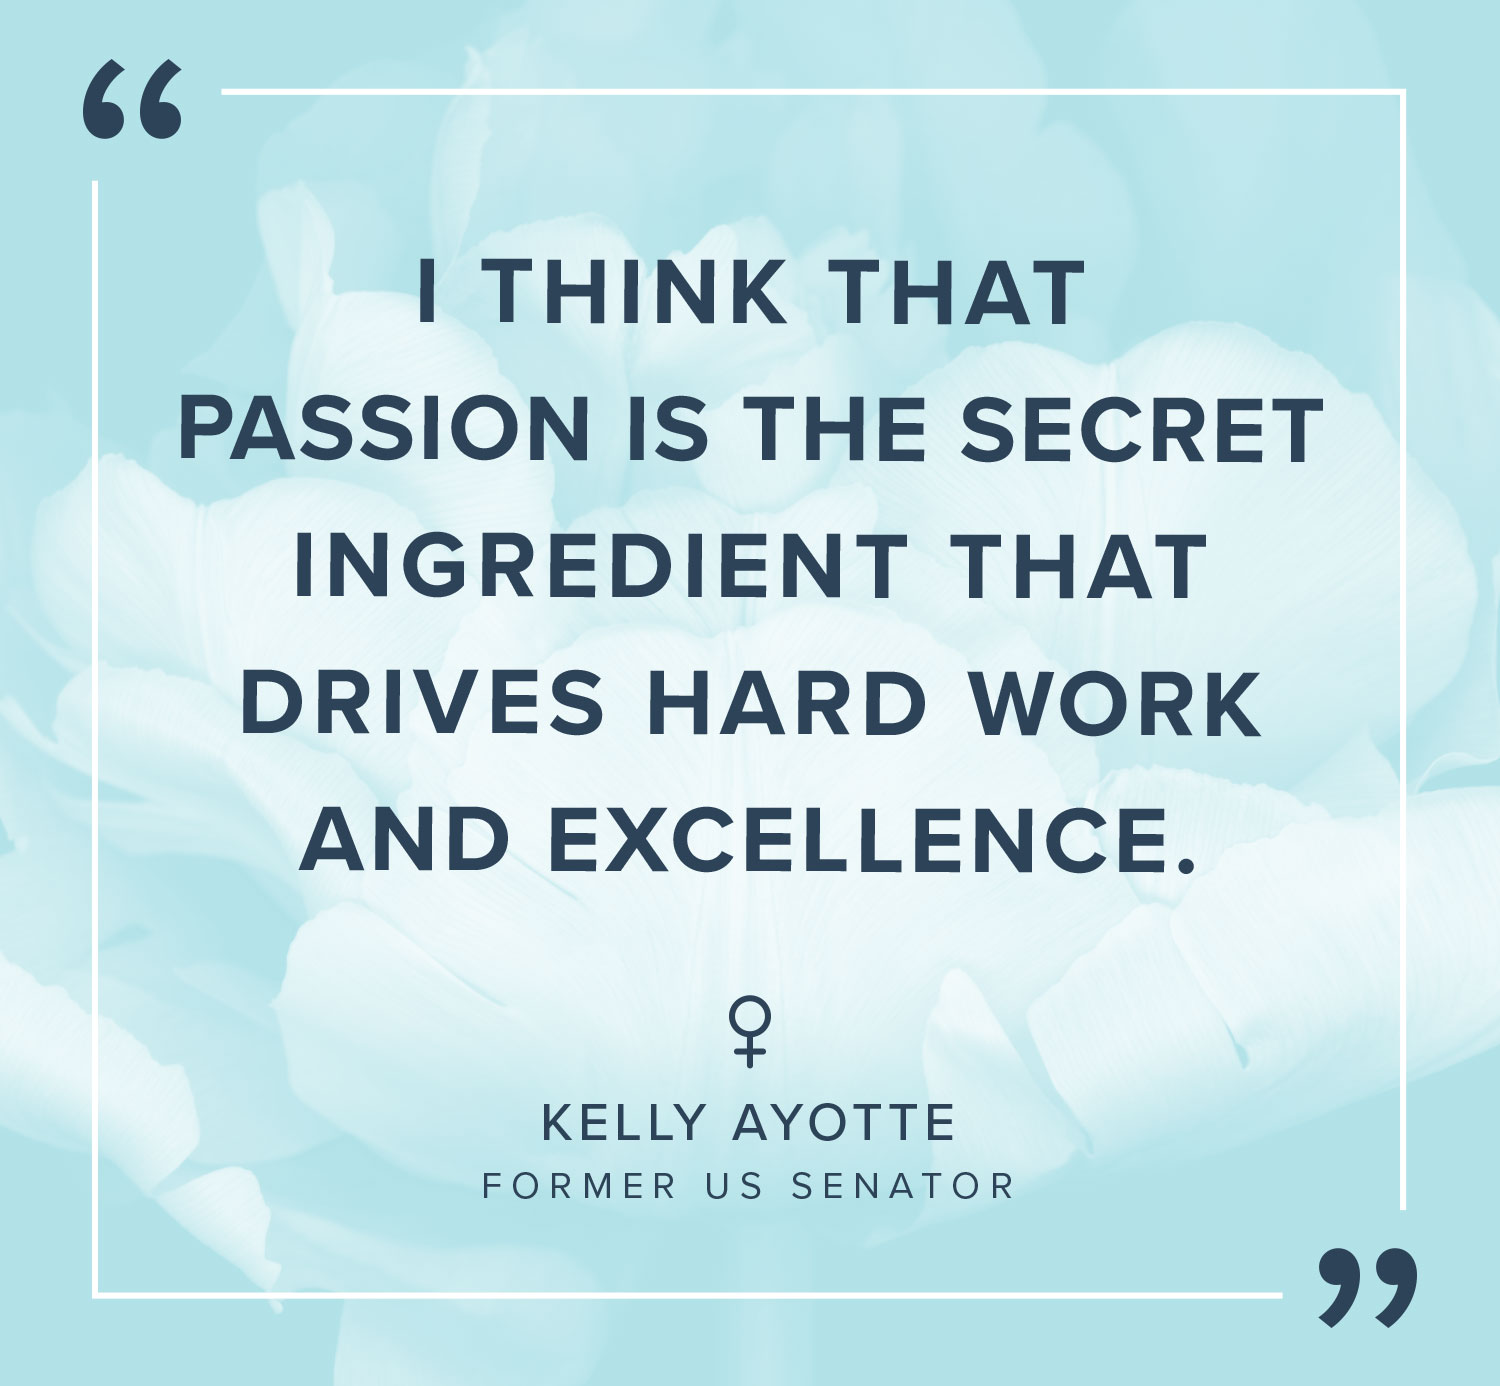 empowering quotes kelly ayotte